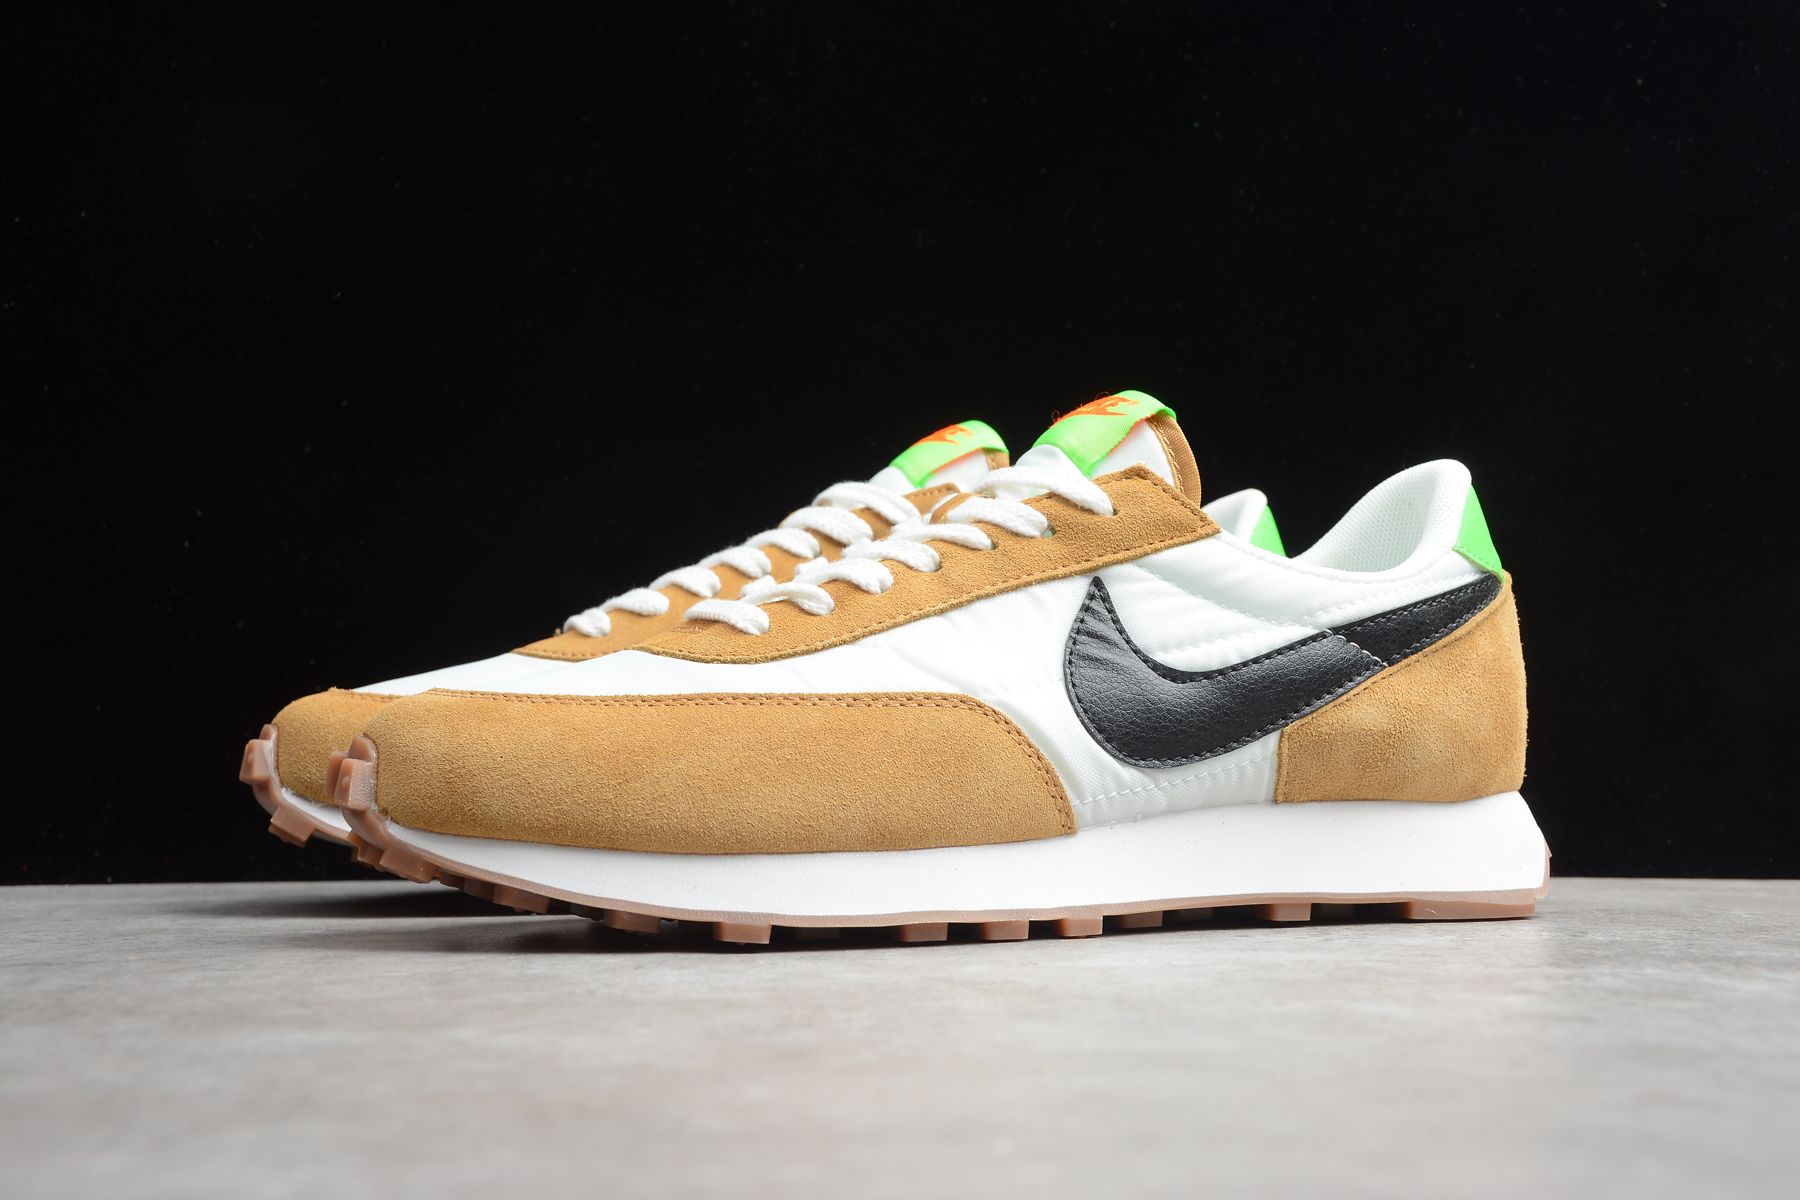 Nike Daybreak Casual Shoes Leather Nylon Suede Cost-effective